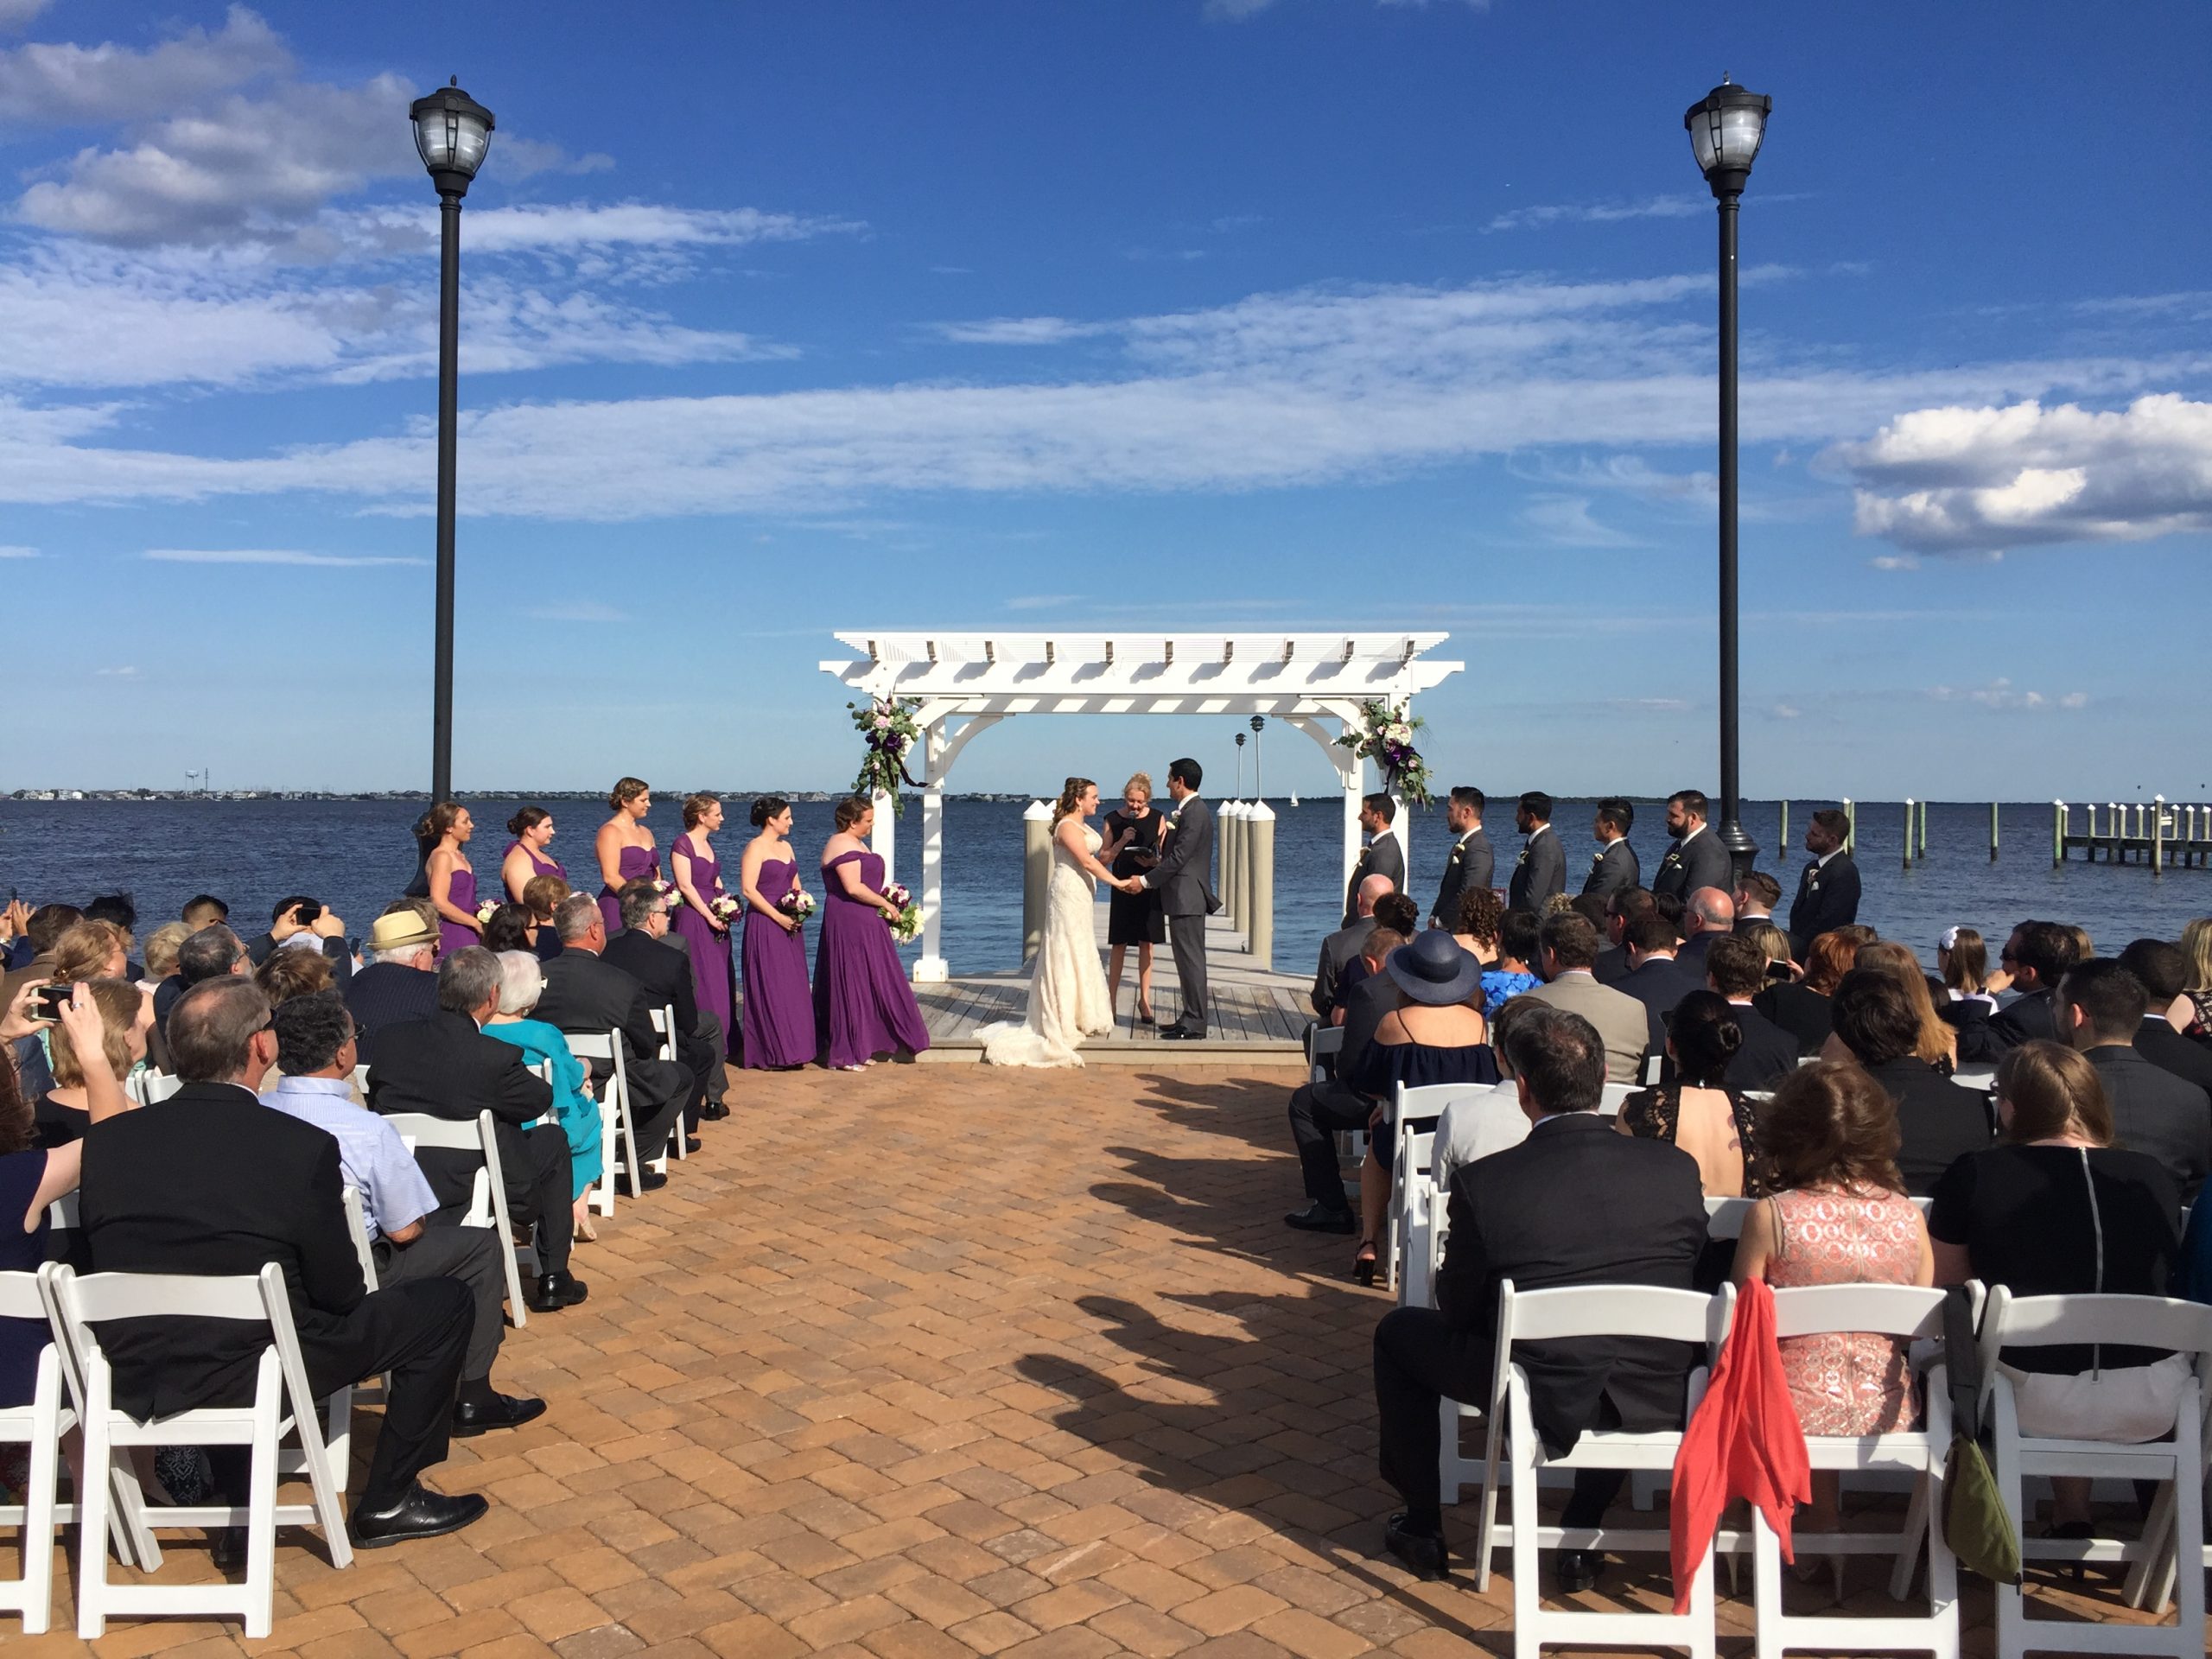 What a spot for ceremony!